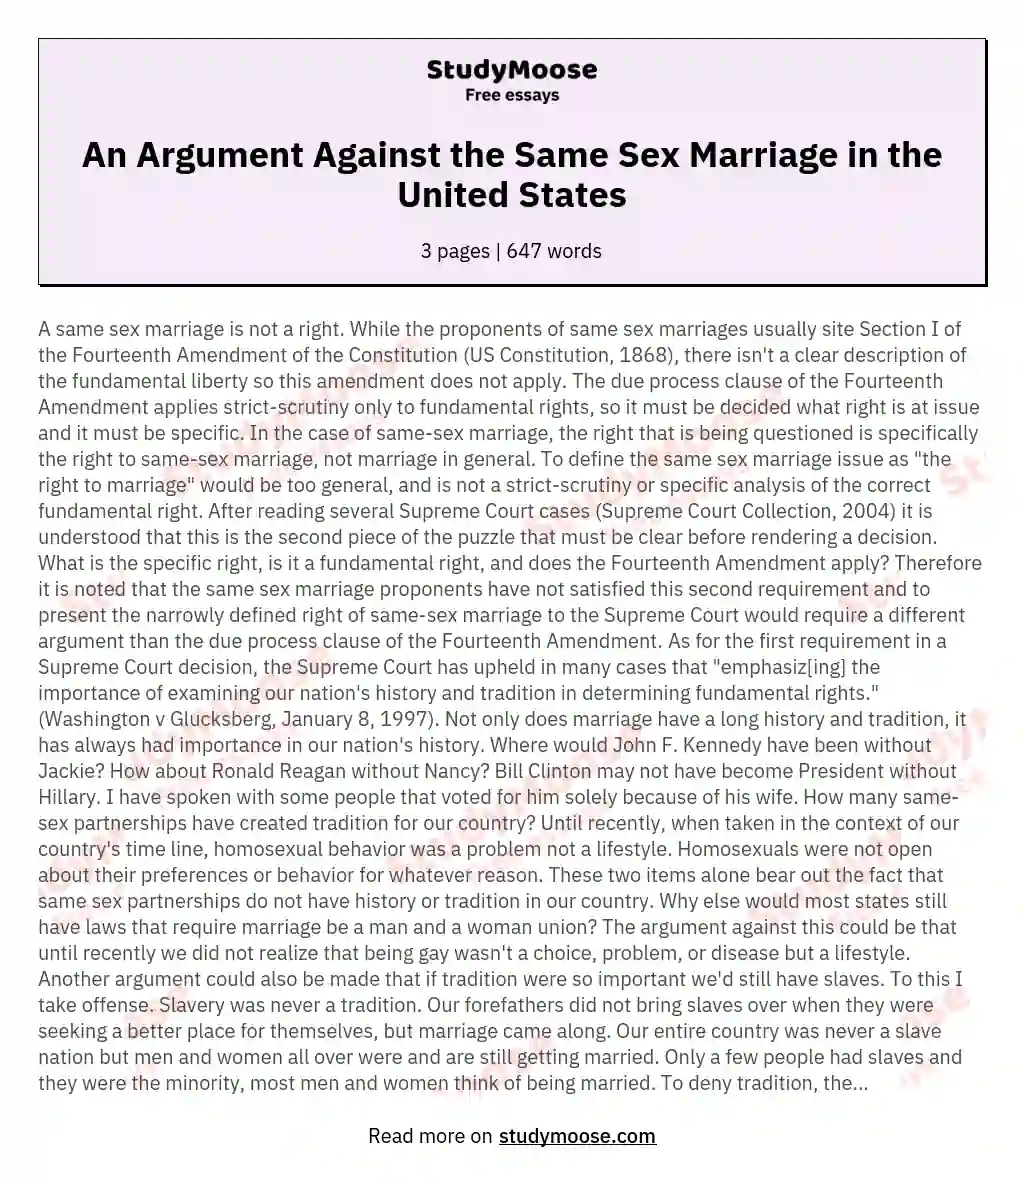 An Argument Against the Same Sex Marriage in the United States essay